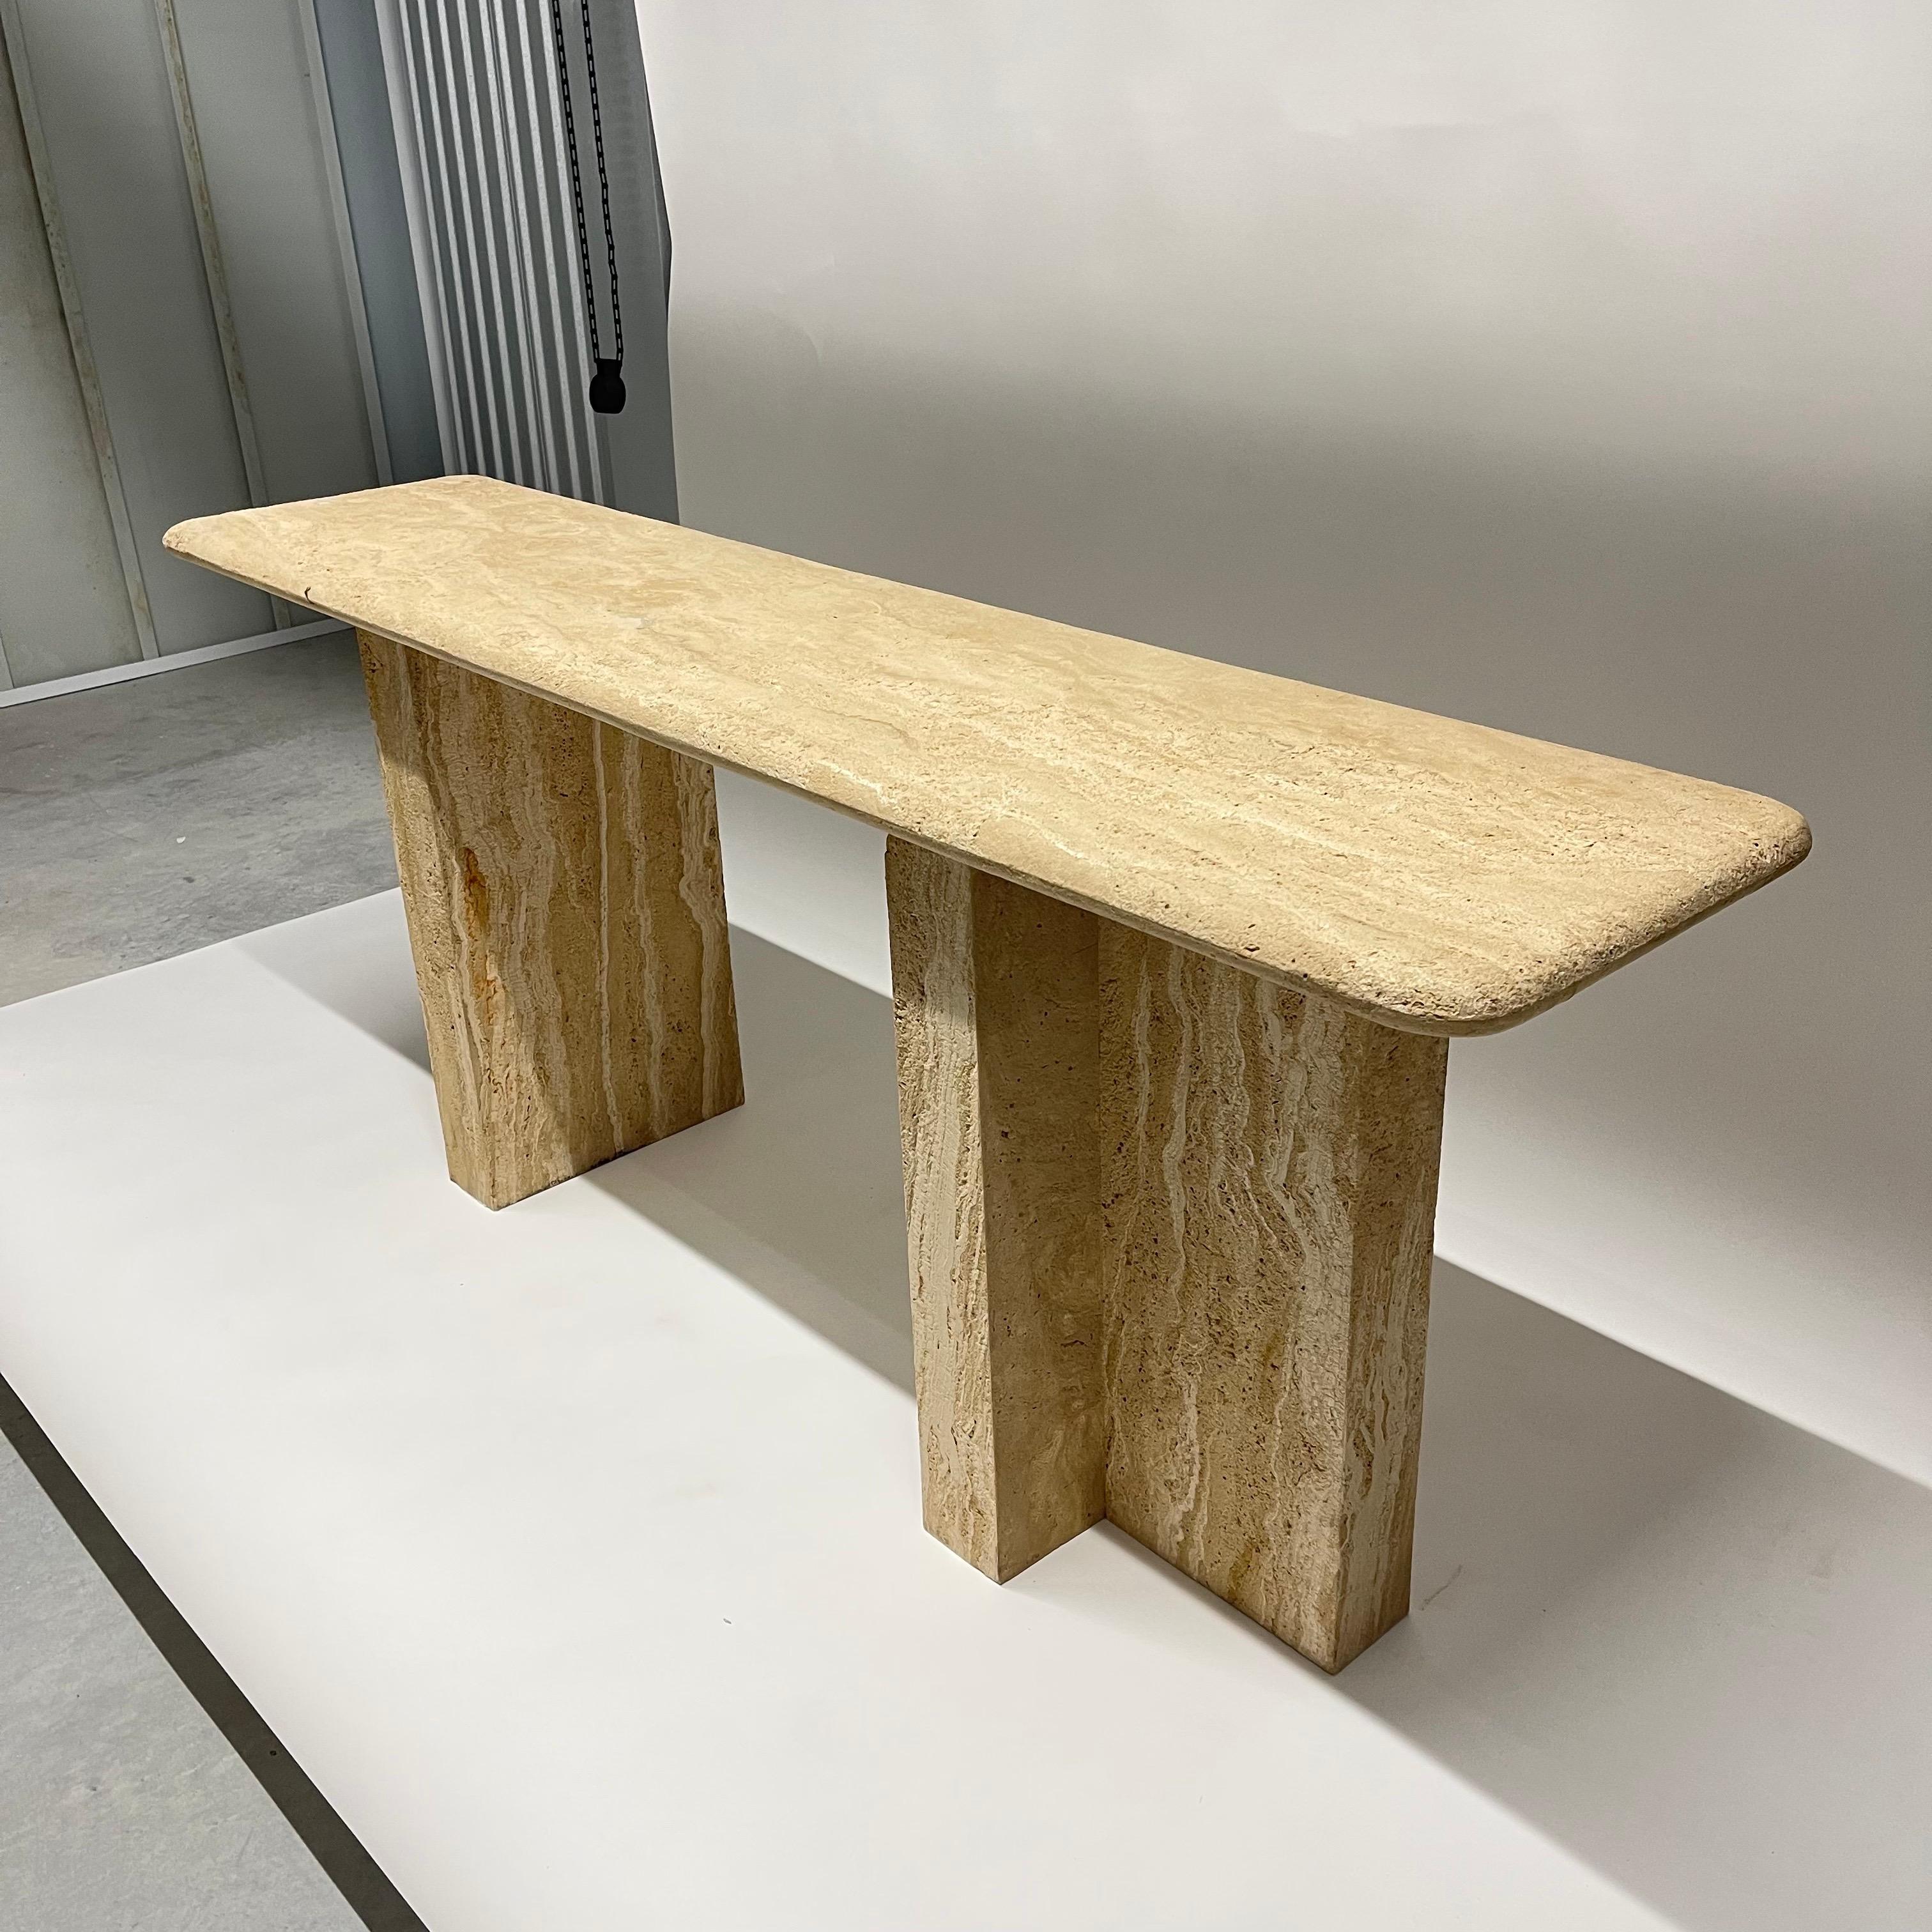 Unique post-modern console or sofa table rendered in sandblasted travertine with two T from pedestal bases and a bullnose top, finished on all sides in the style of Angelo Mangiarotti, Italy, circa 1980's.